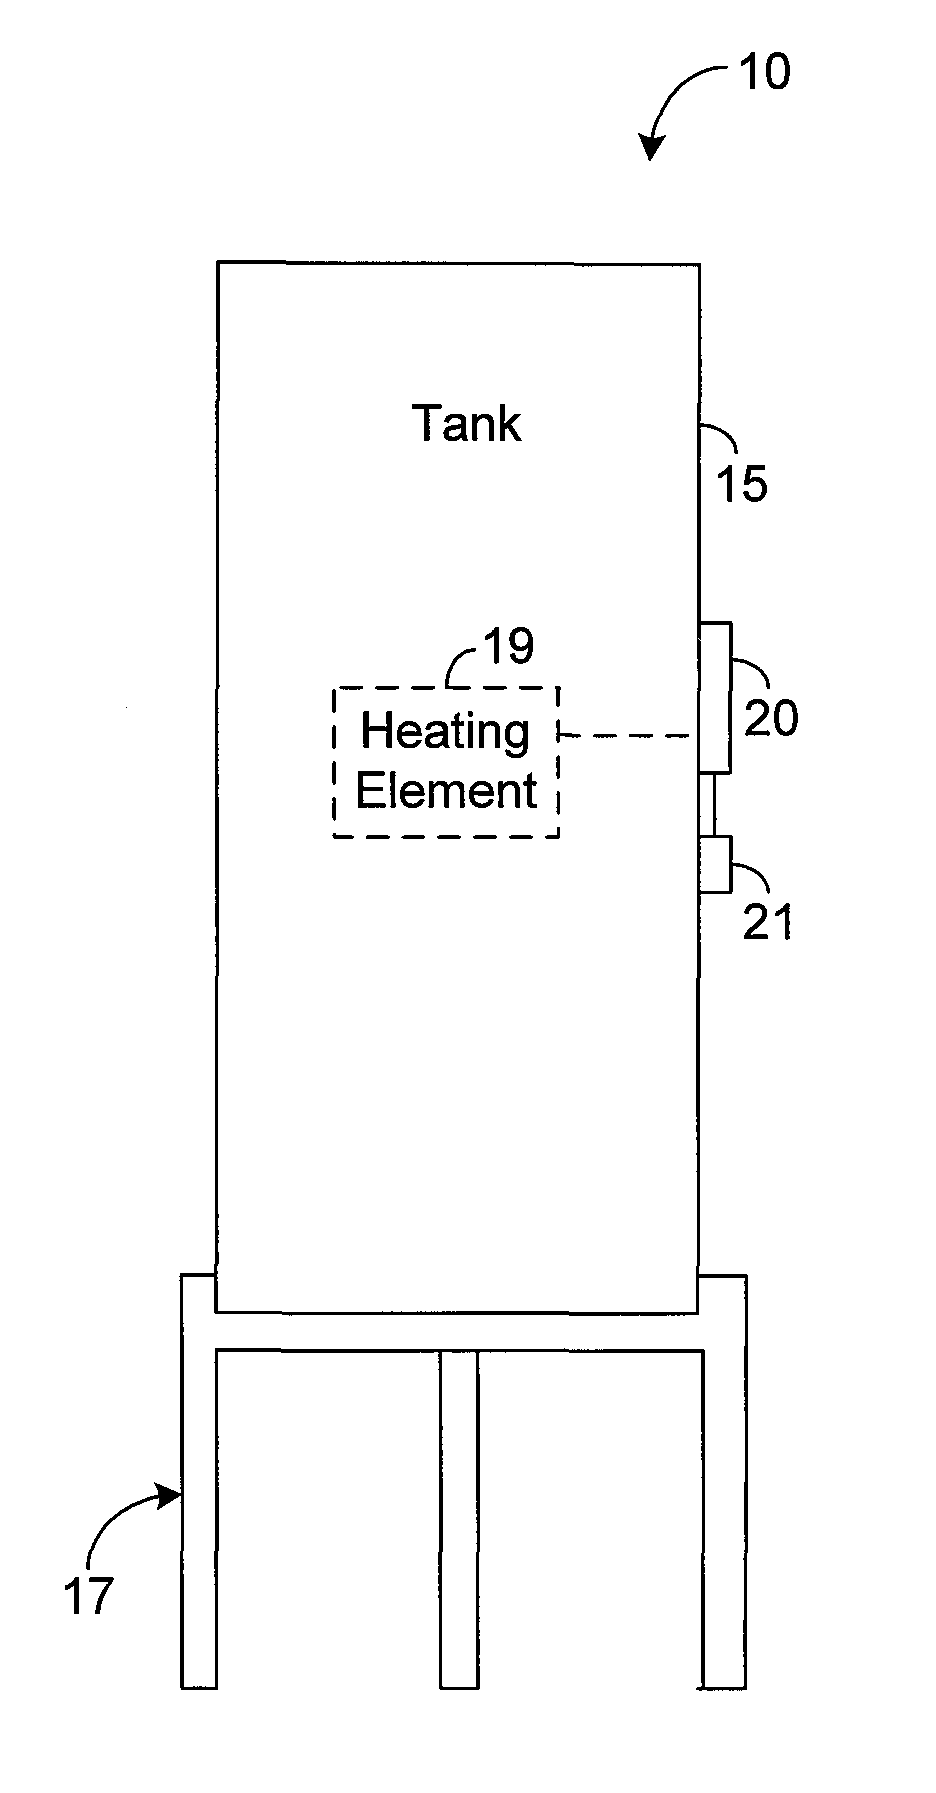 Modular control system and method for water heaters